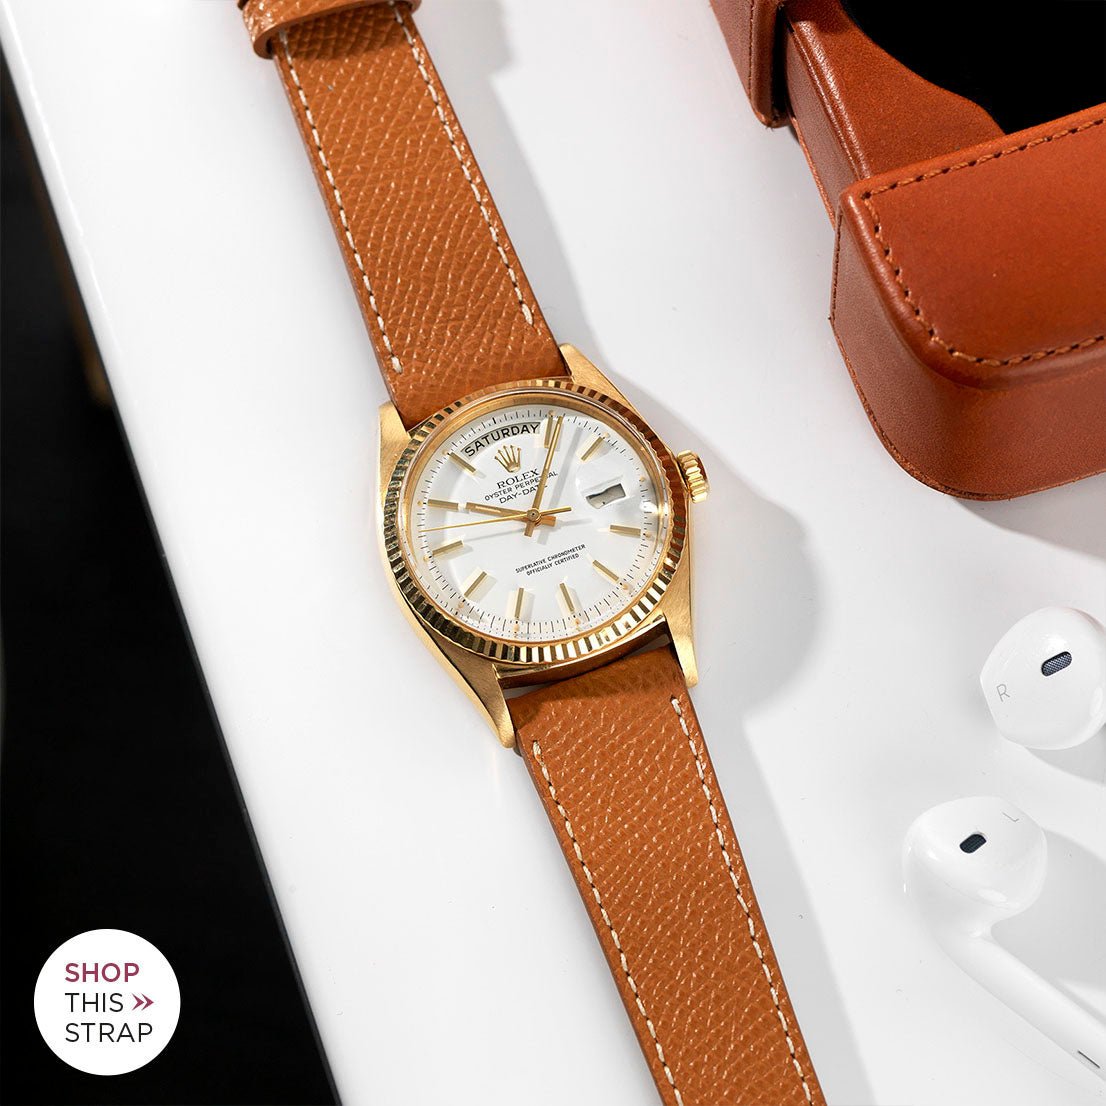 Bulang and Sons_Strap Guide _The Day Date White Dial_Cognac Brown Leather Watch Strap